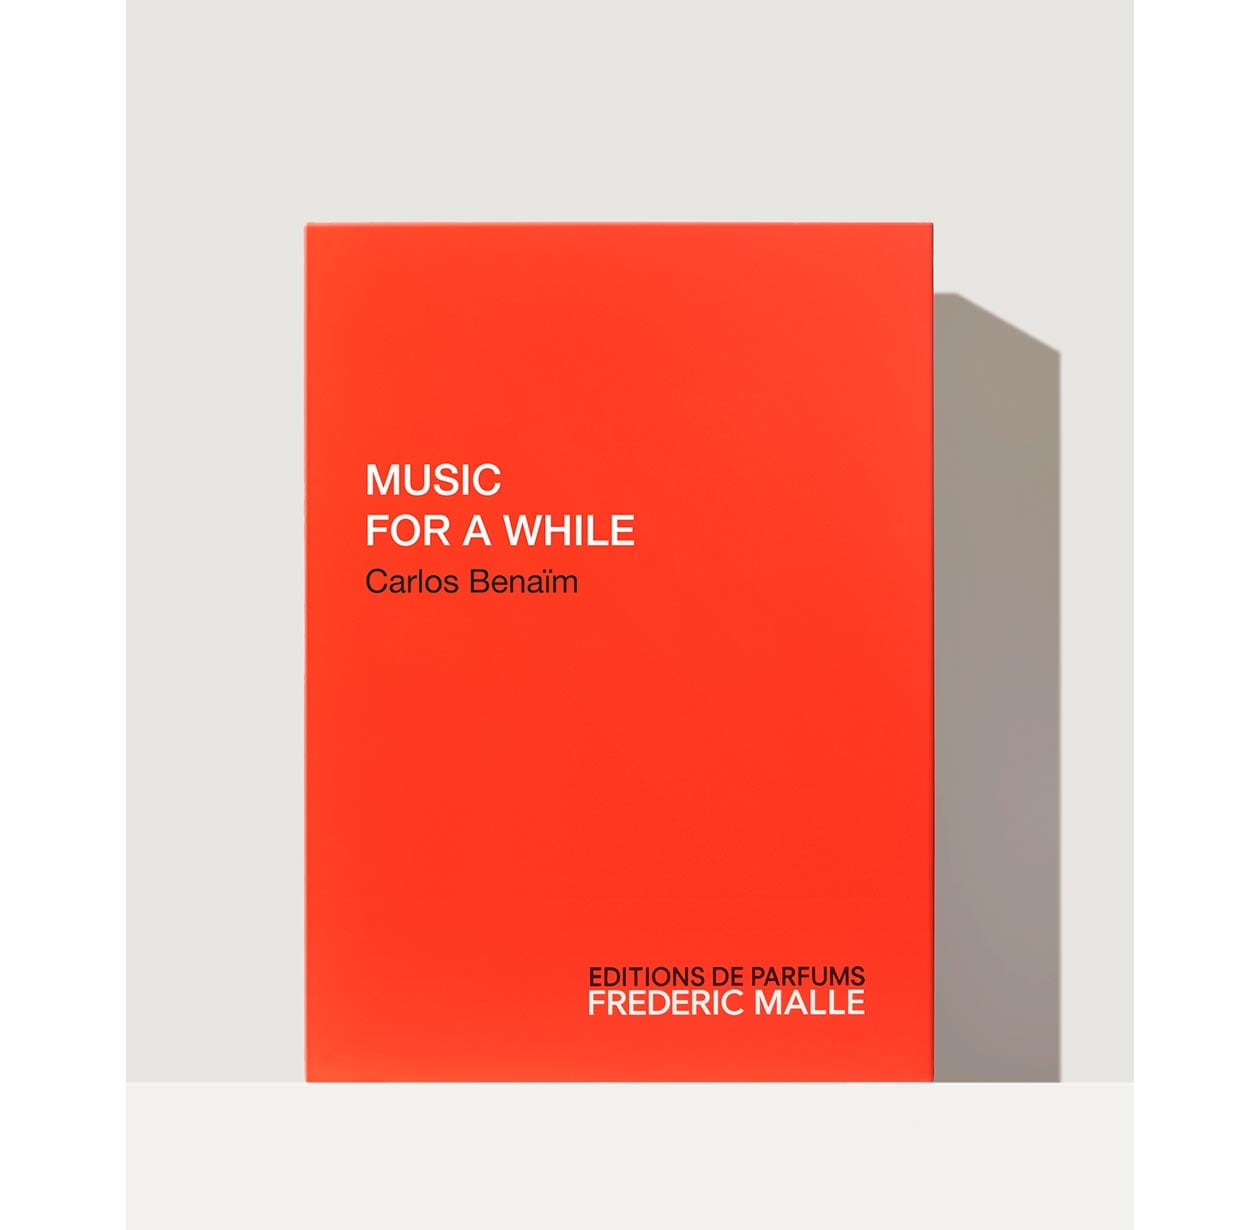 MUSIC FOR A WHILE by Carlos Benaïm